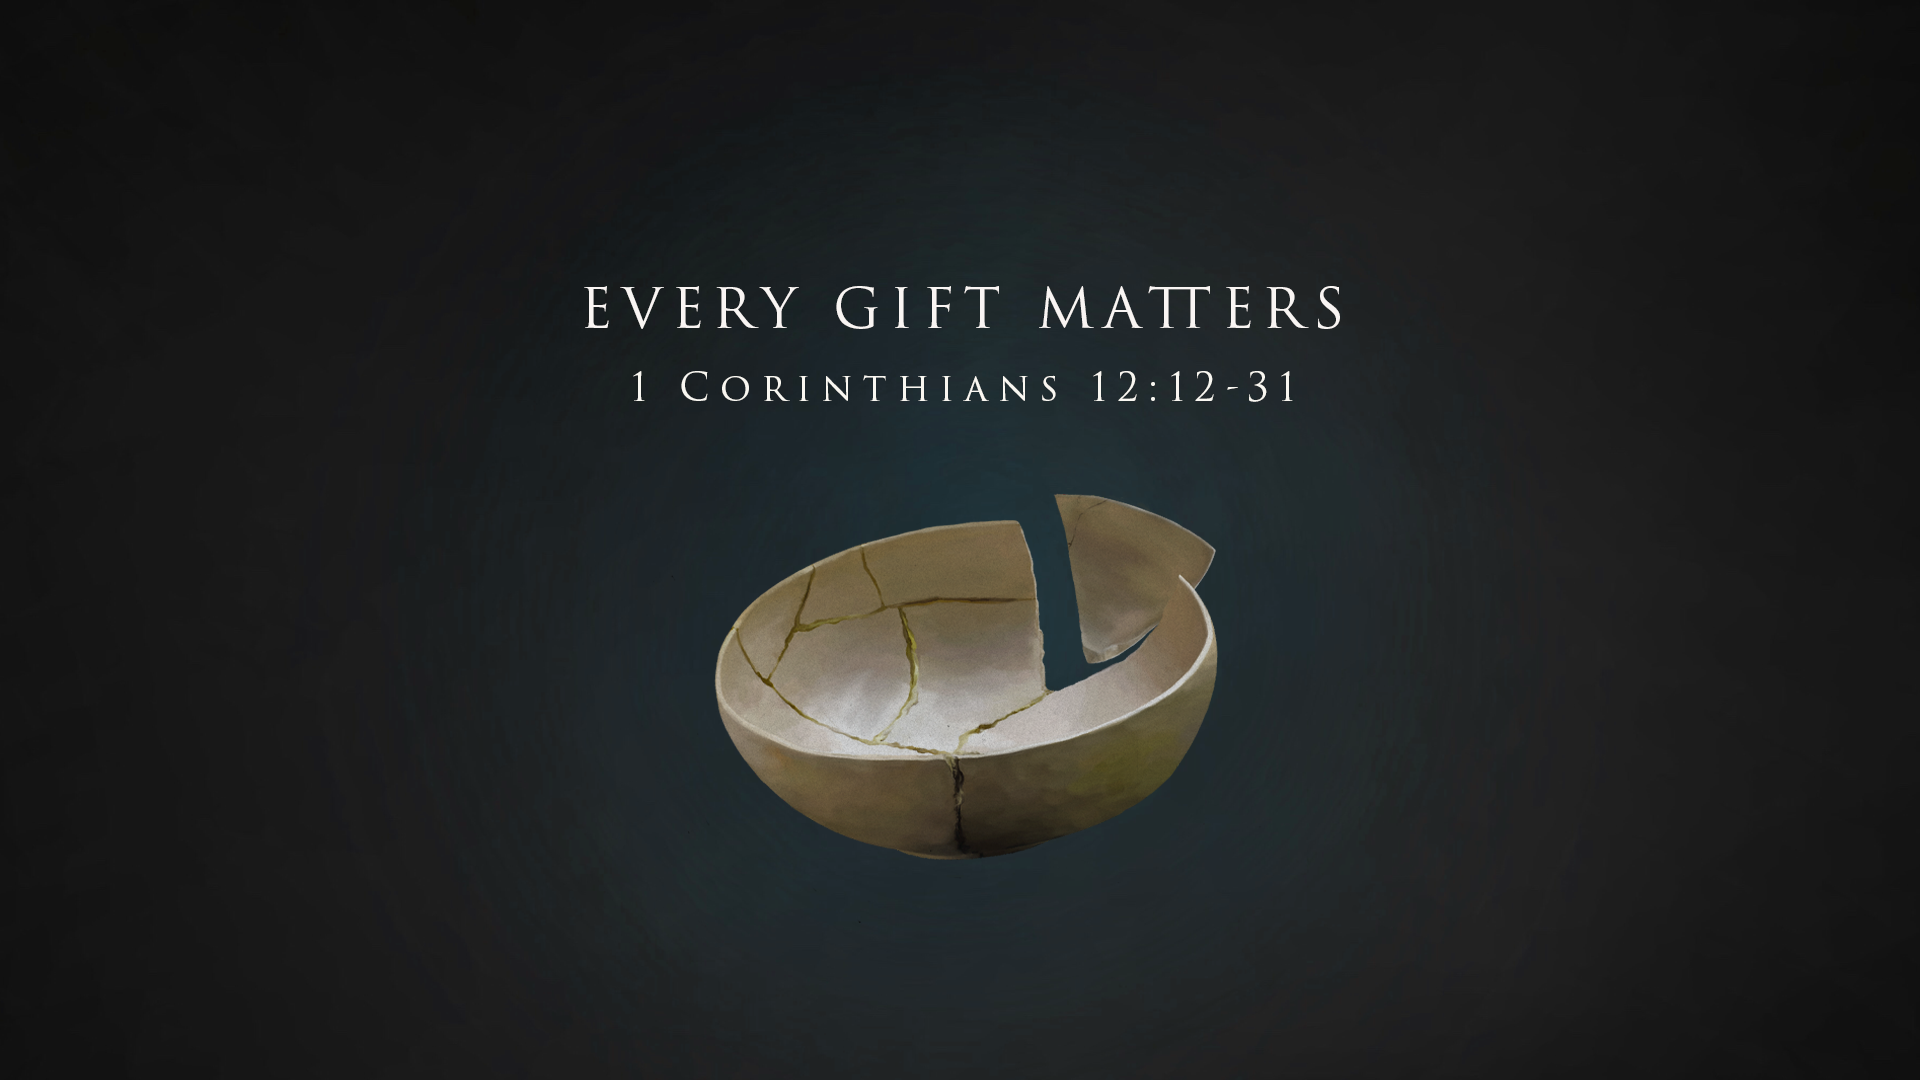 Spiritual Gifts Part 2: Every Gift Matters